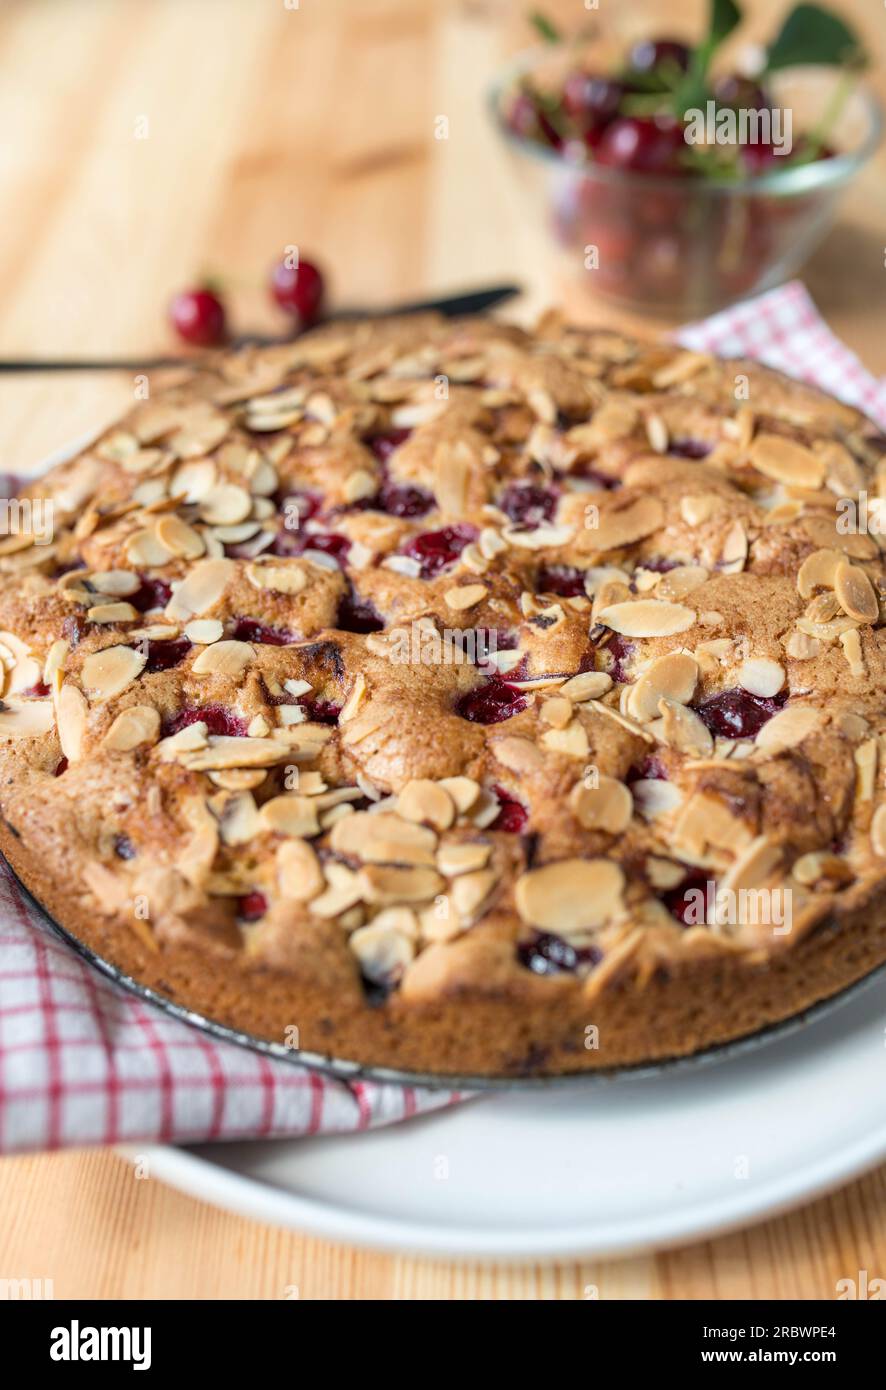 Cherry cake or cherry pie  with almonds and sour cherries on light wooden table Stock Photo